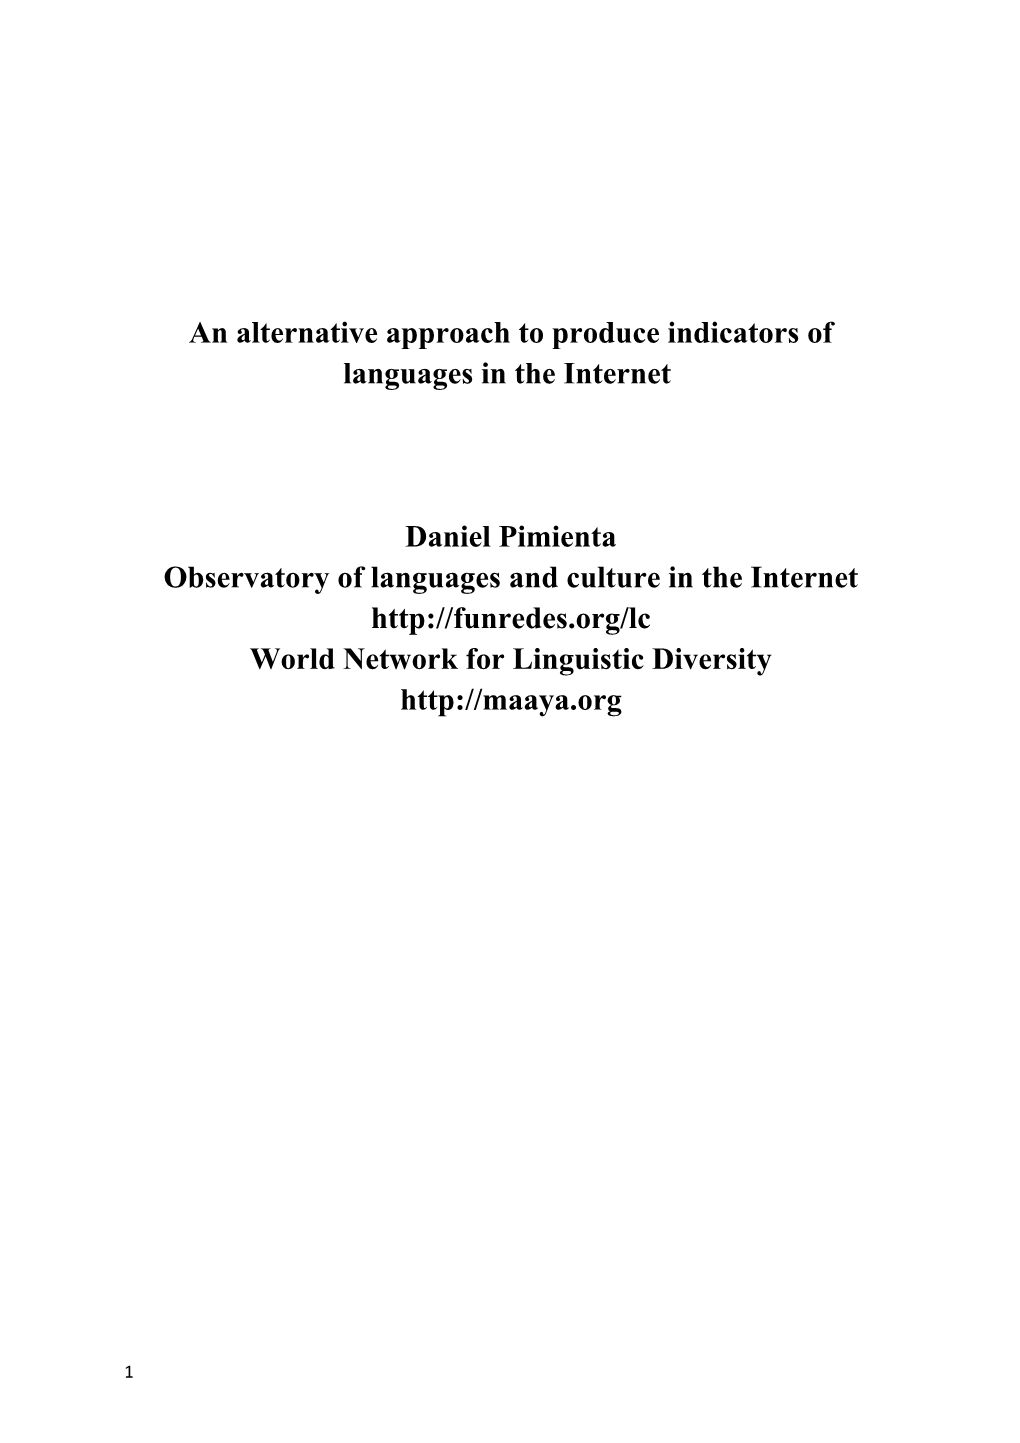 An Alternative Approach to Produce Indicators of Languages in the Internet